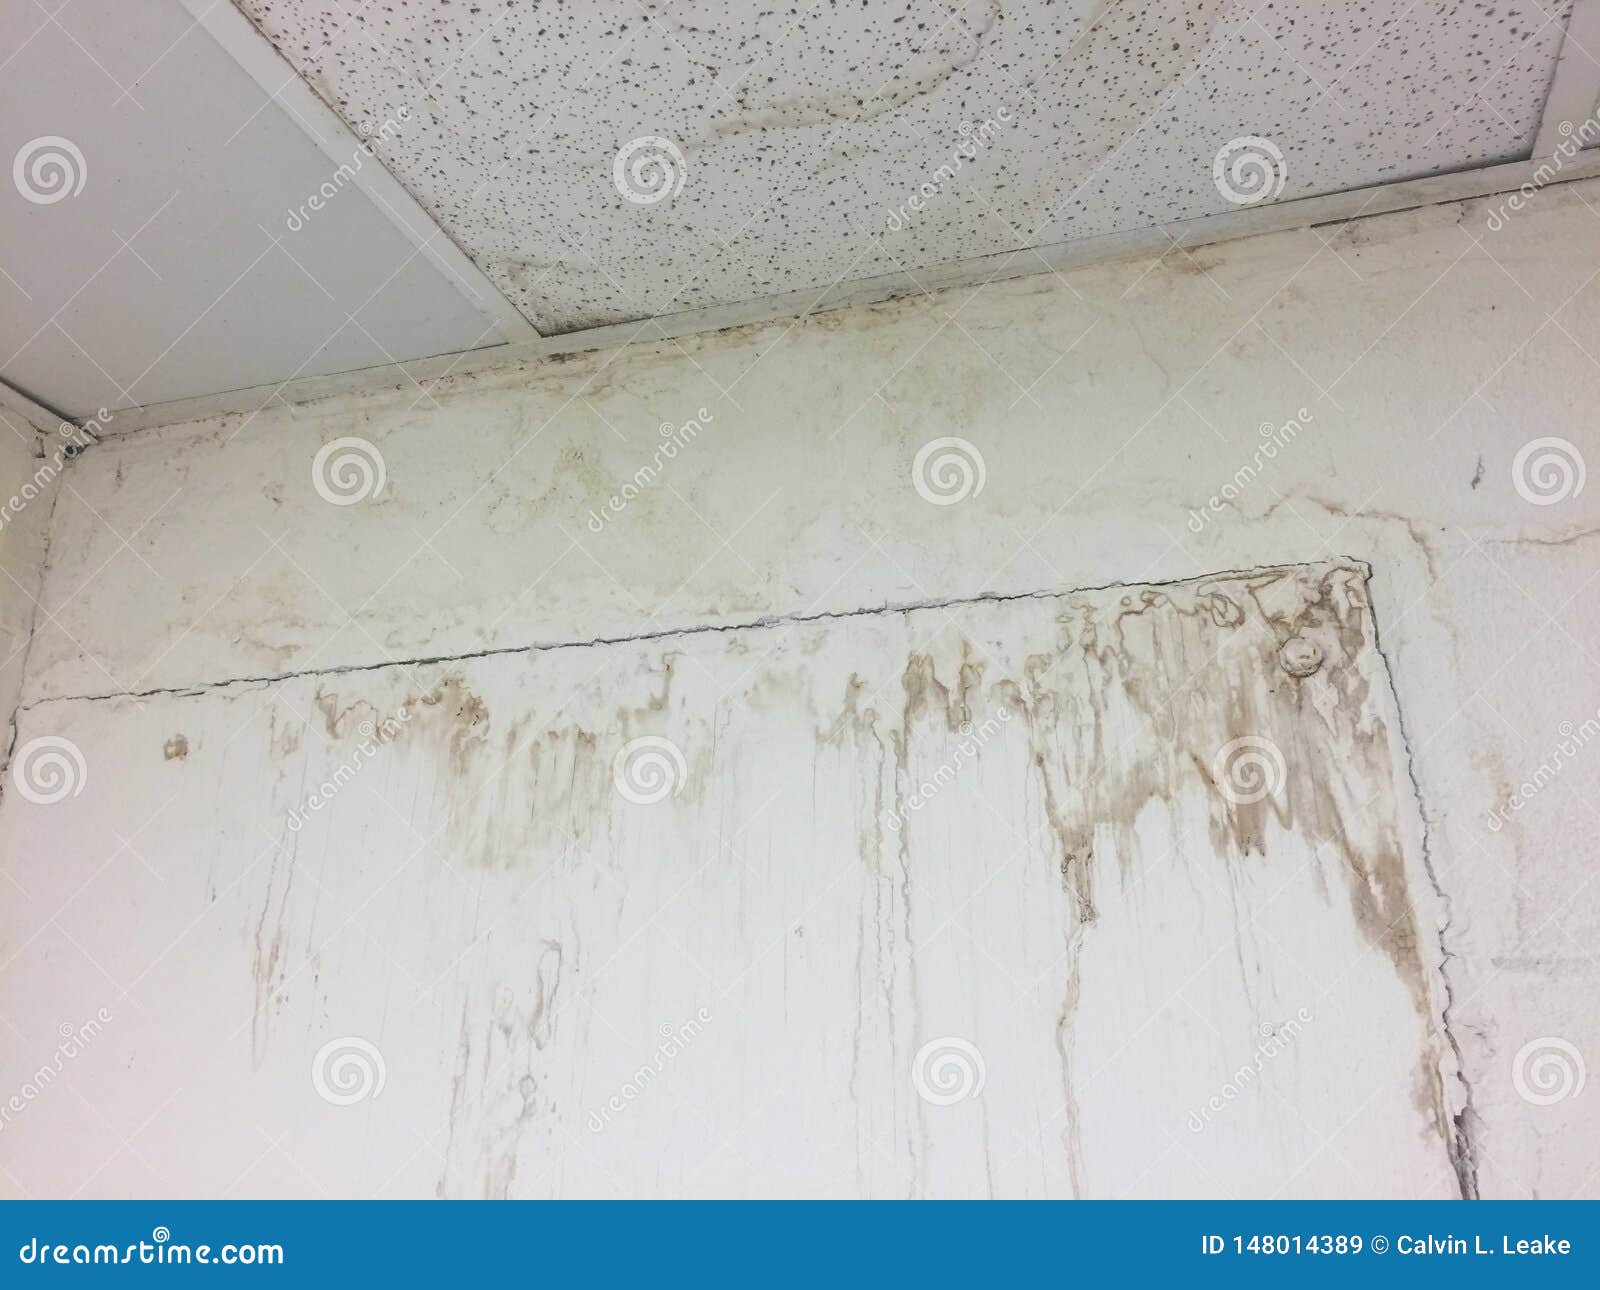 Water Damaged Ceiling Tiles And Drywall Stock Image Image